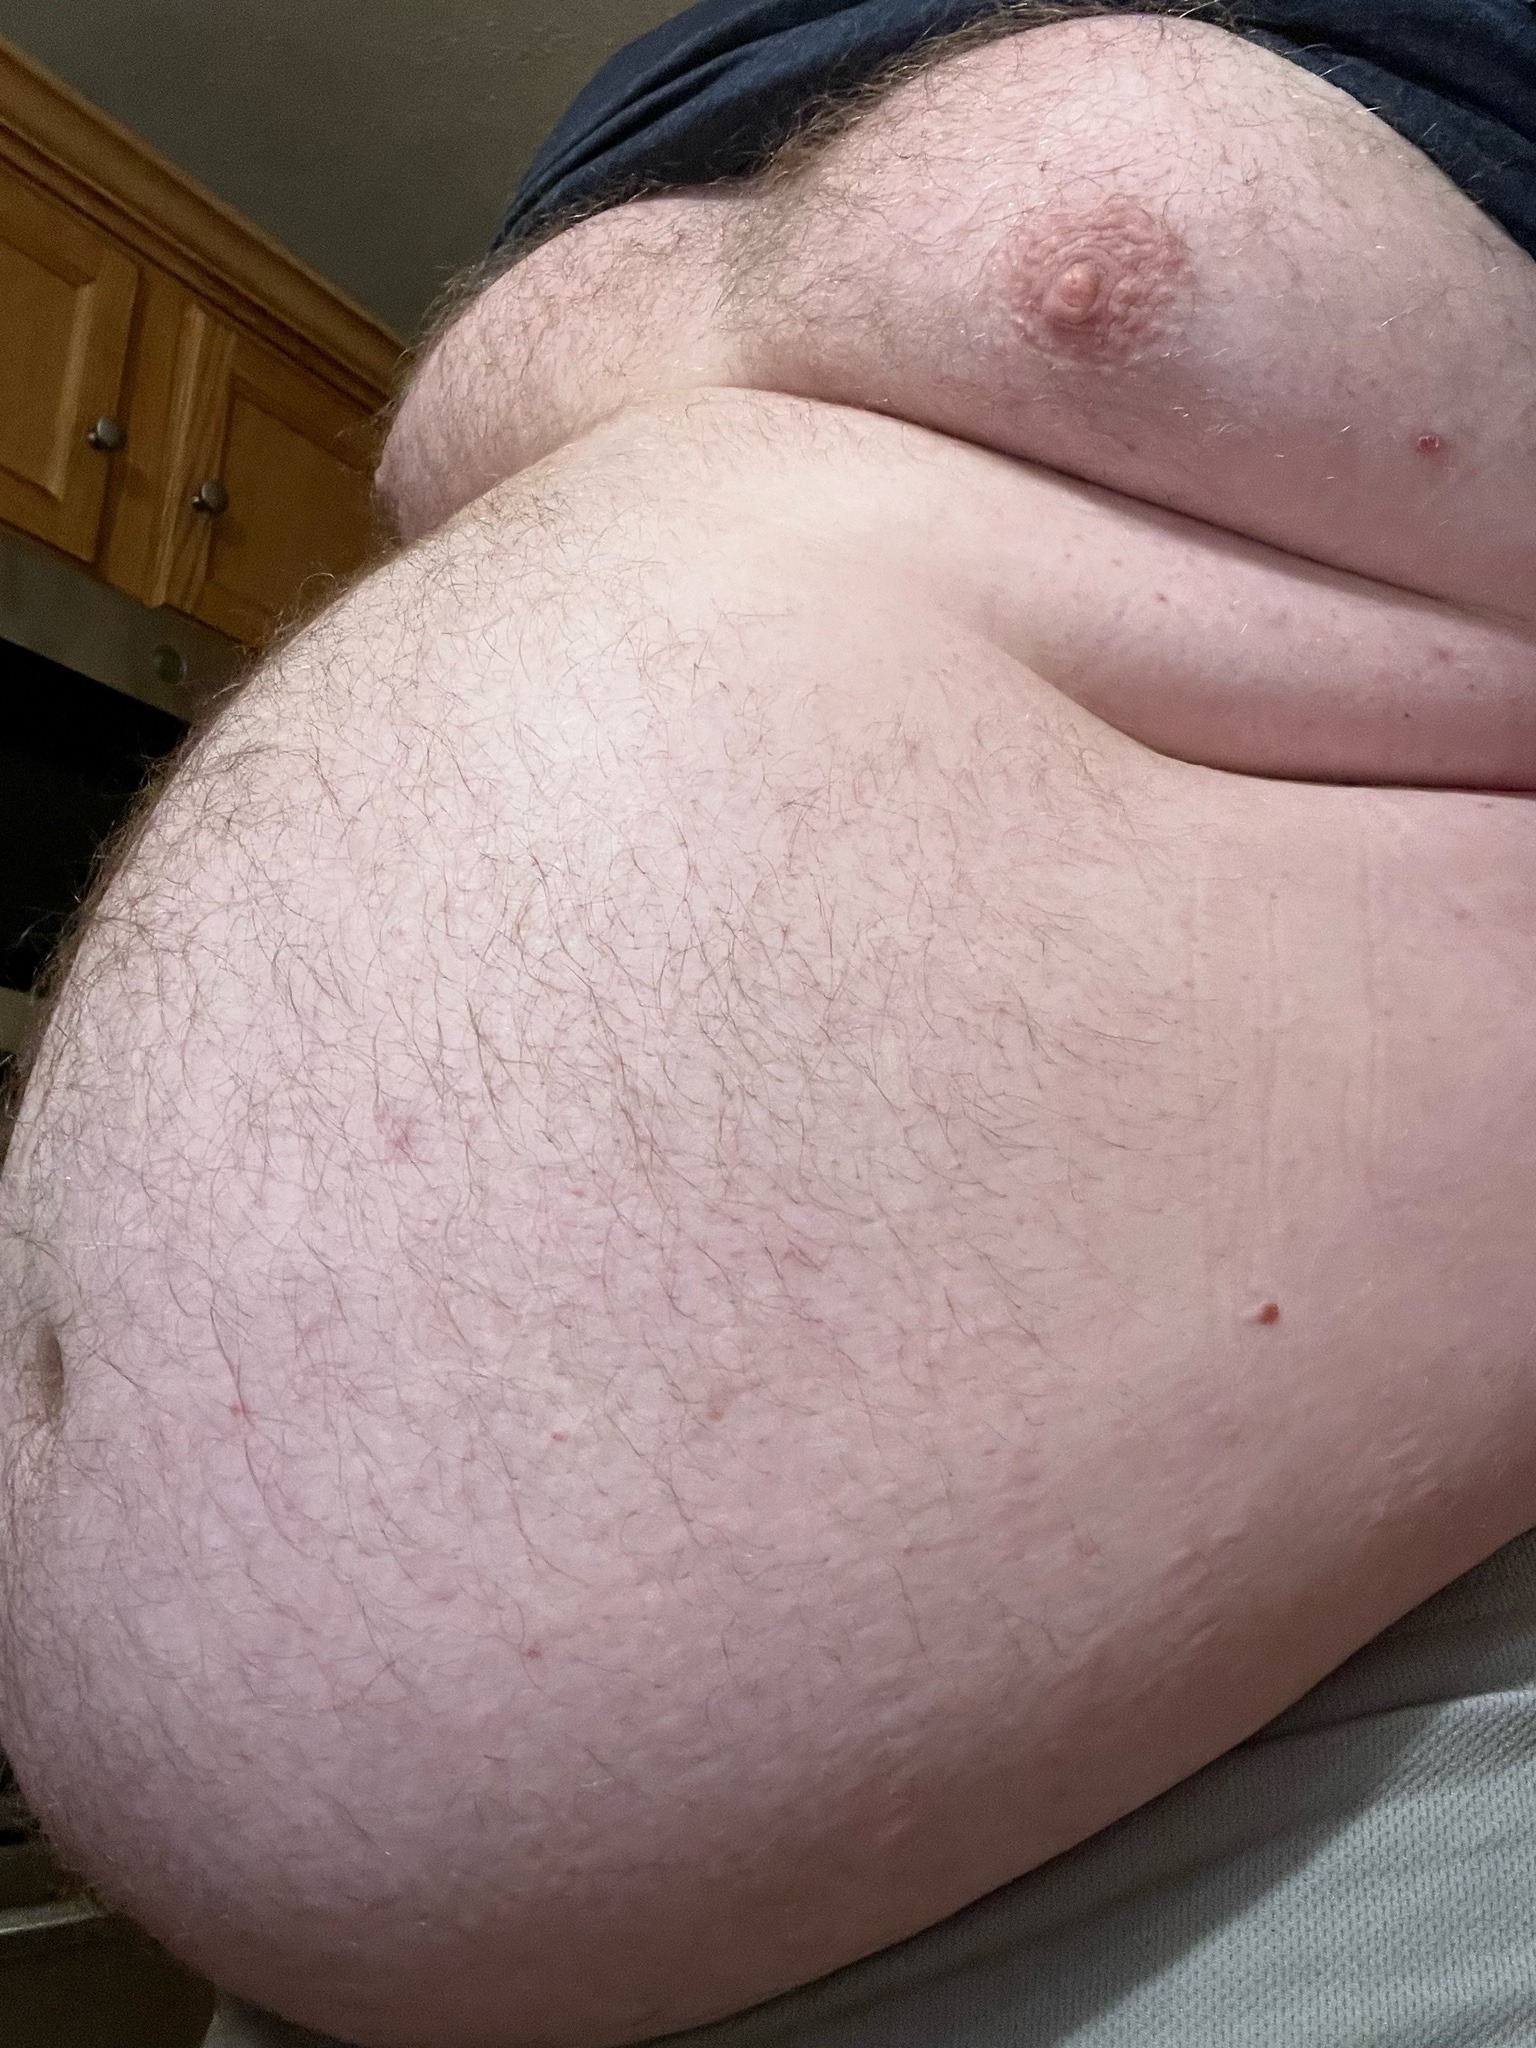 randolphfatter:I fucking love getting fatter. I wanna keep getting fatter forever I wanna be a massive breath heaving tub of lard. I feel like I’m fatter every week and I sit all day at work fantasizing about what my coworkers must be thinking. And